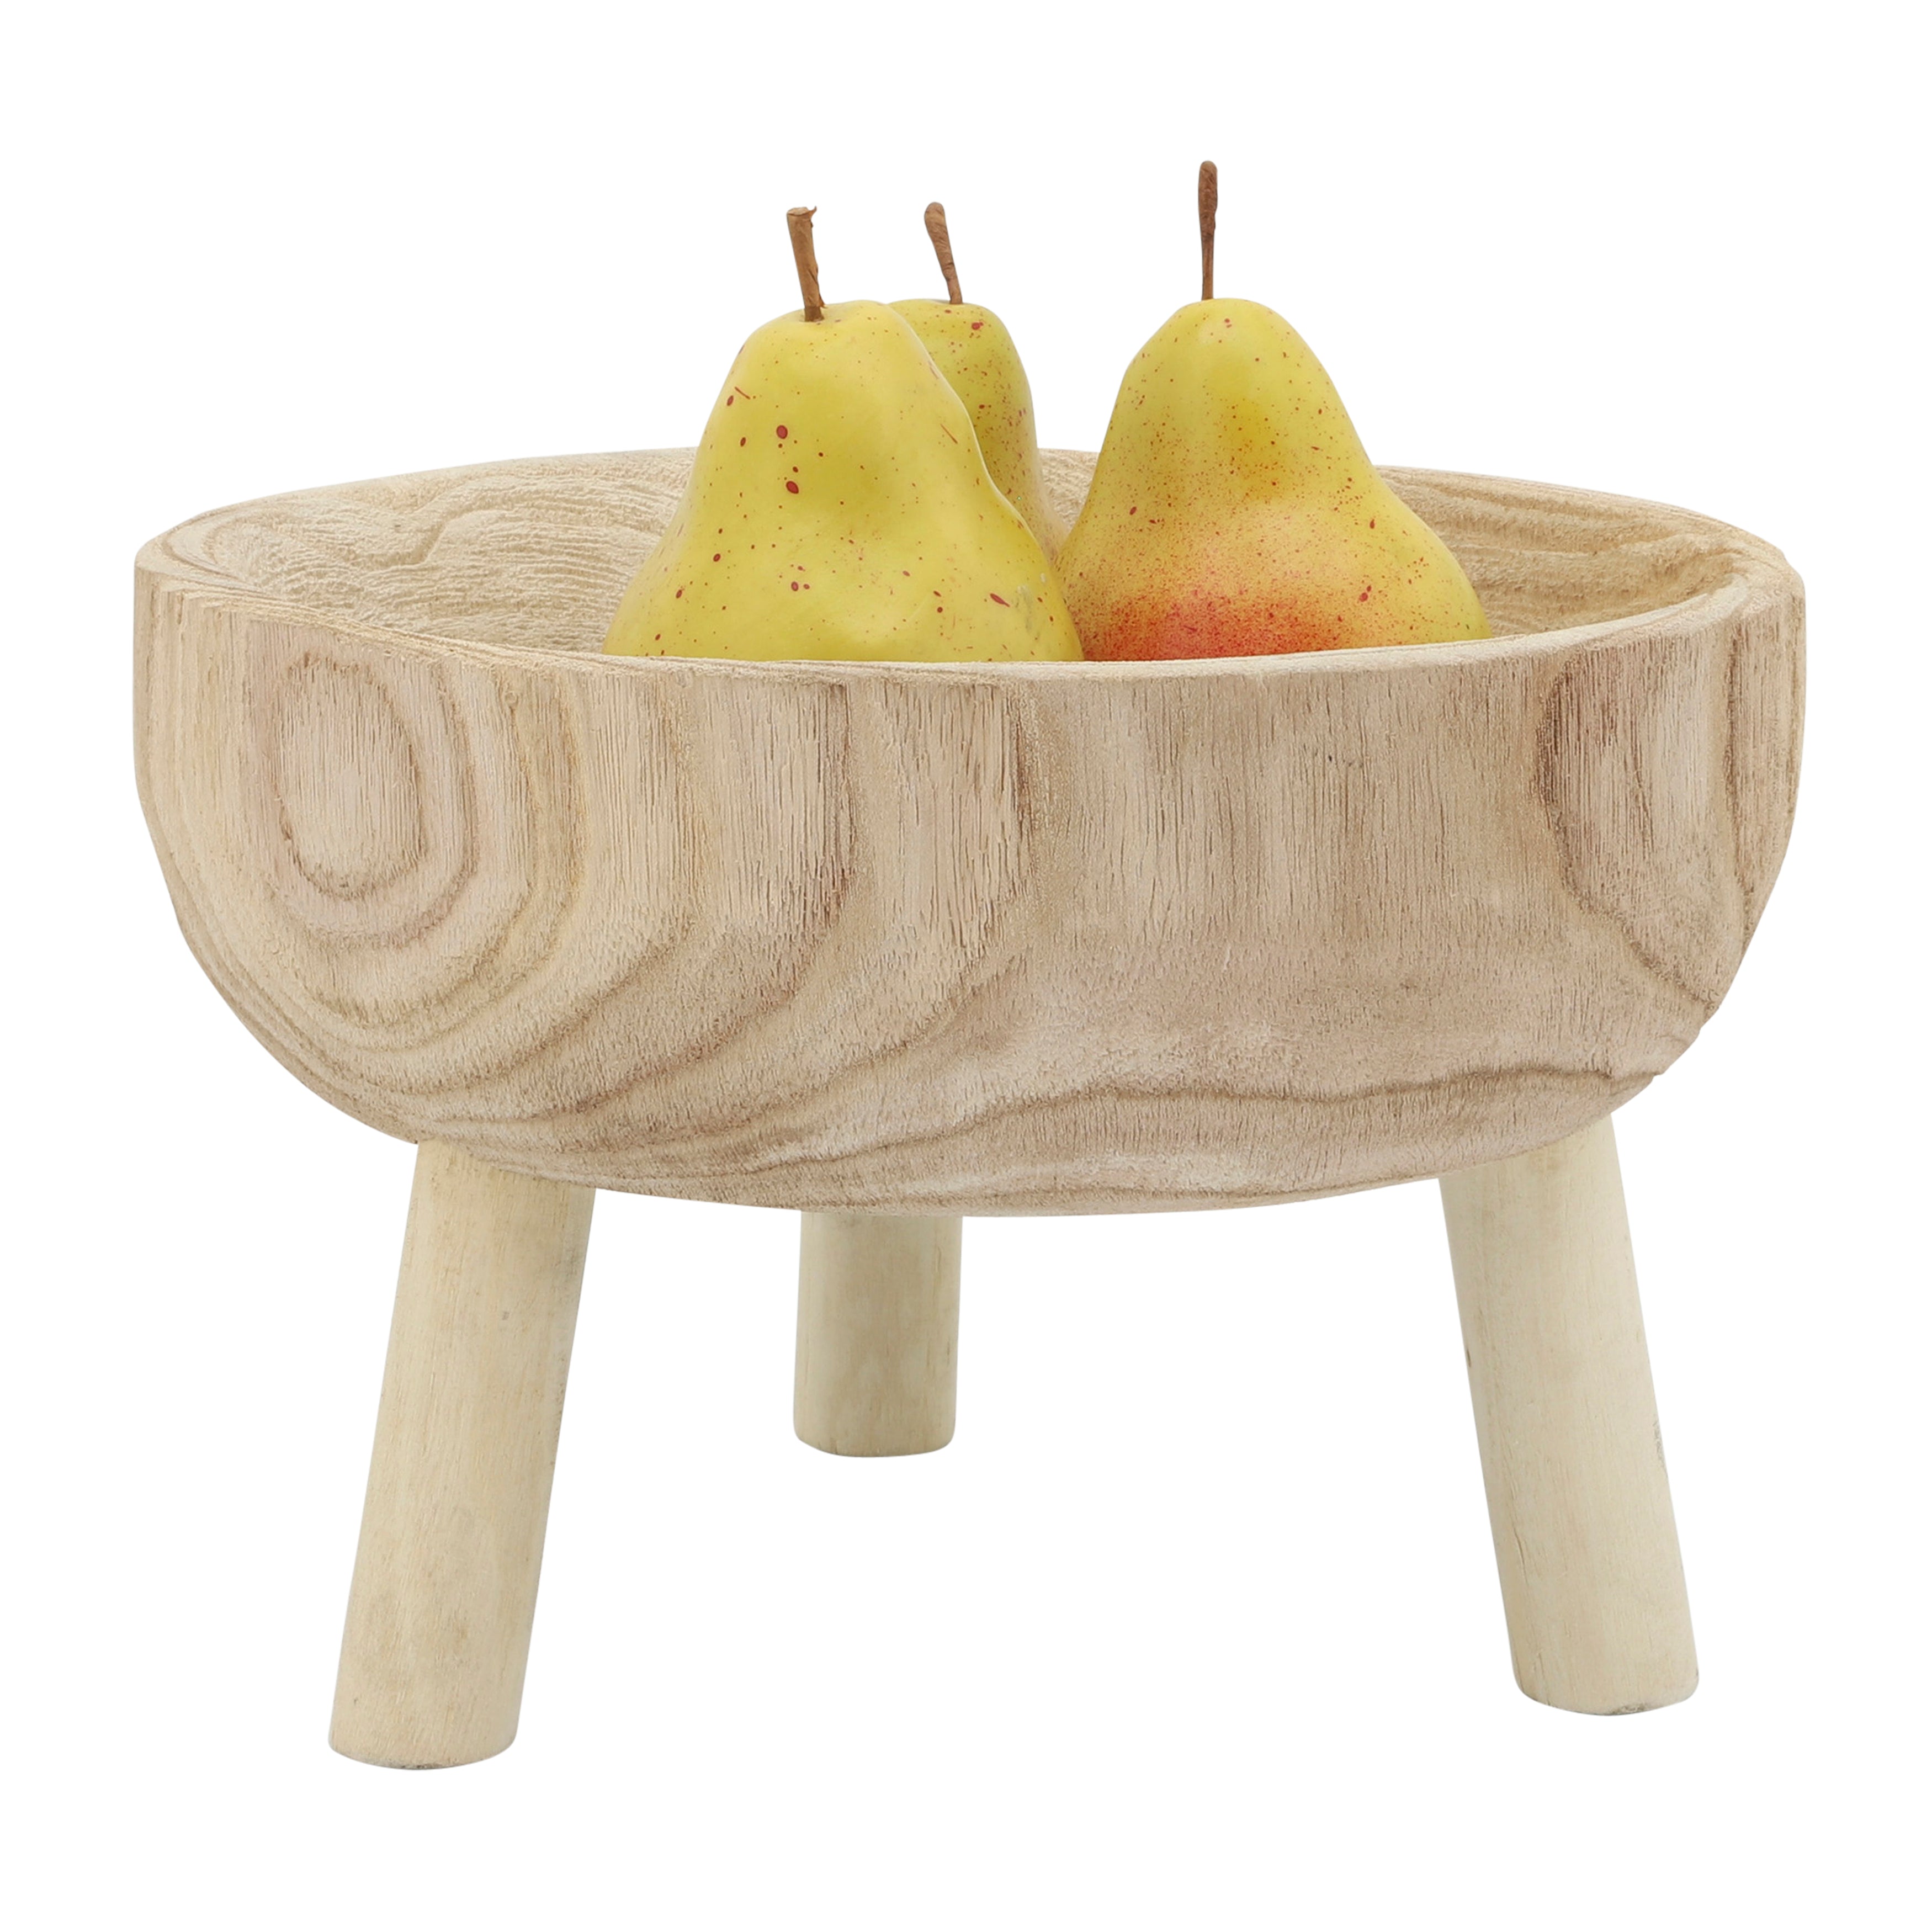 Wood Bowl With Legs - Natural